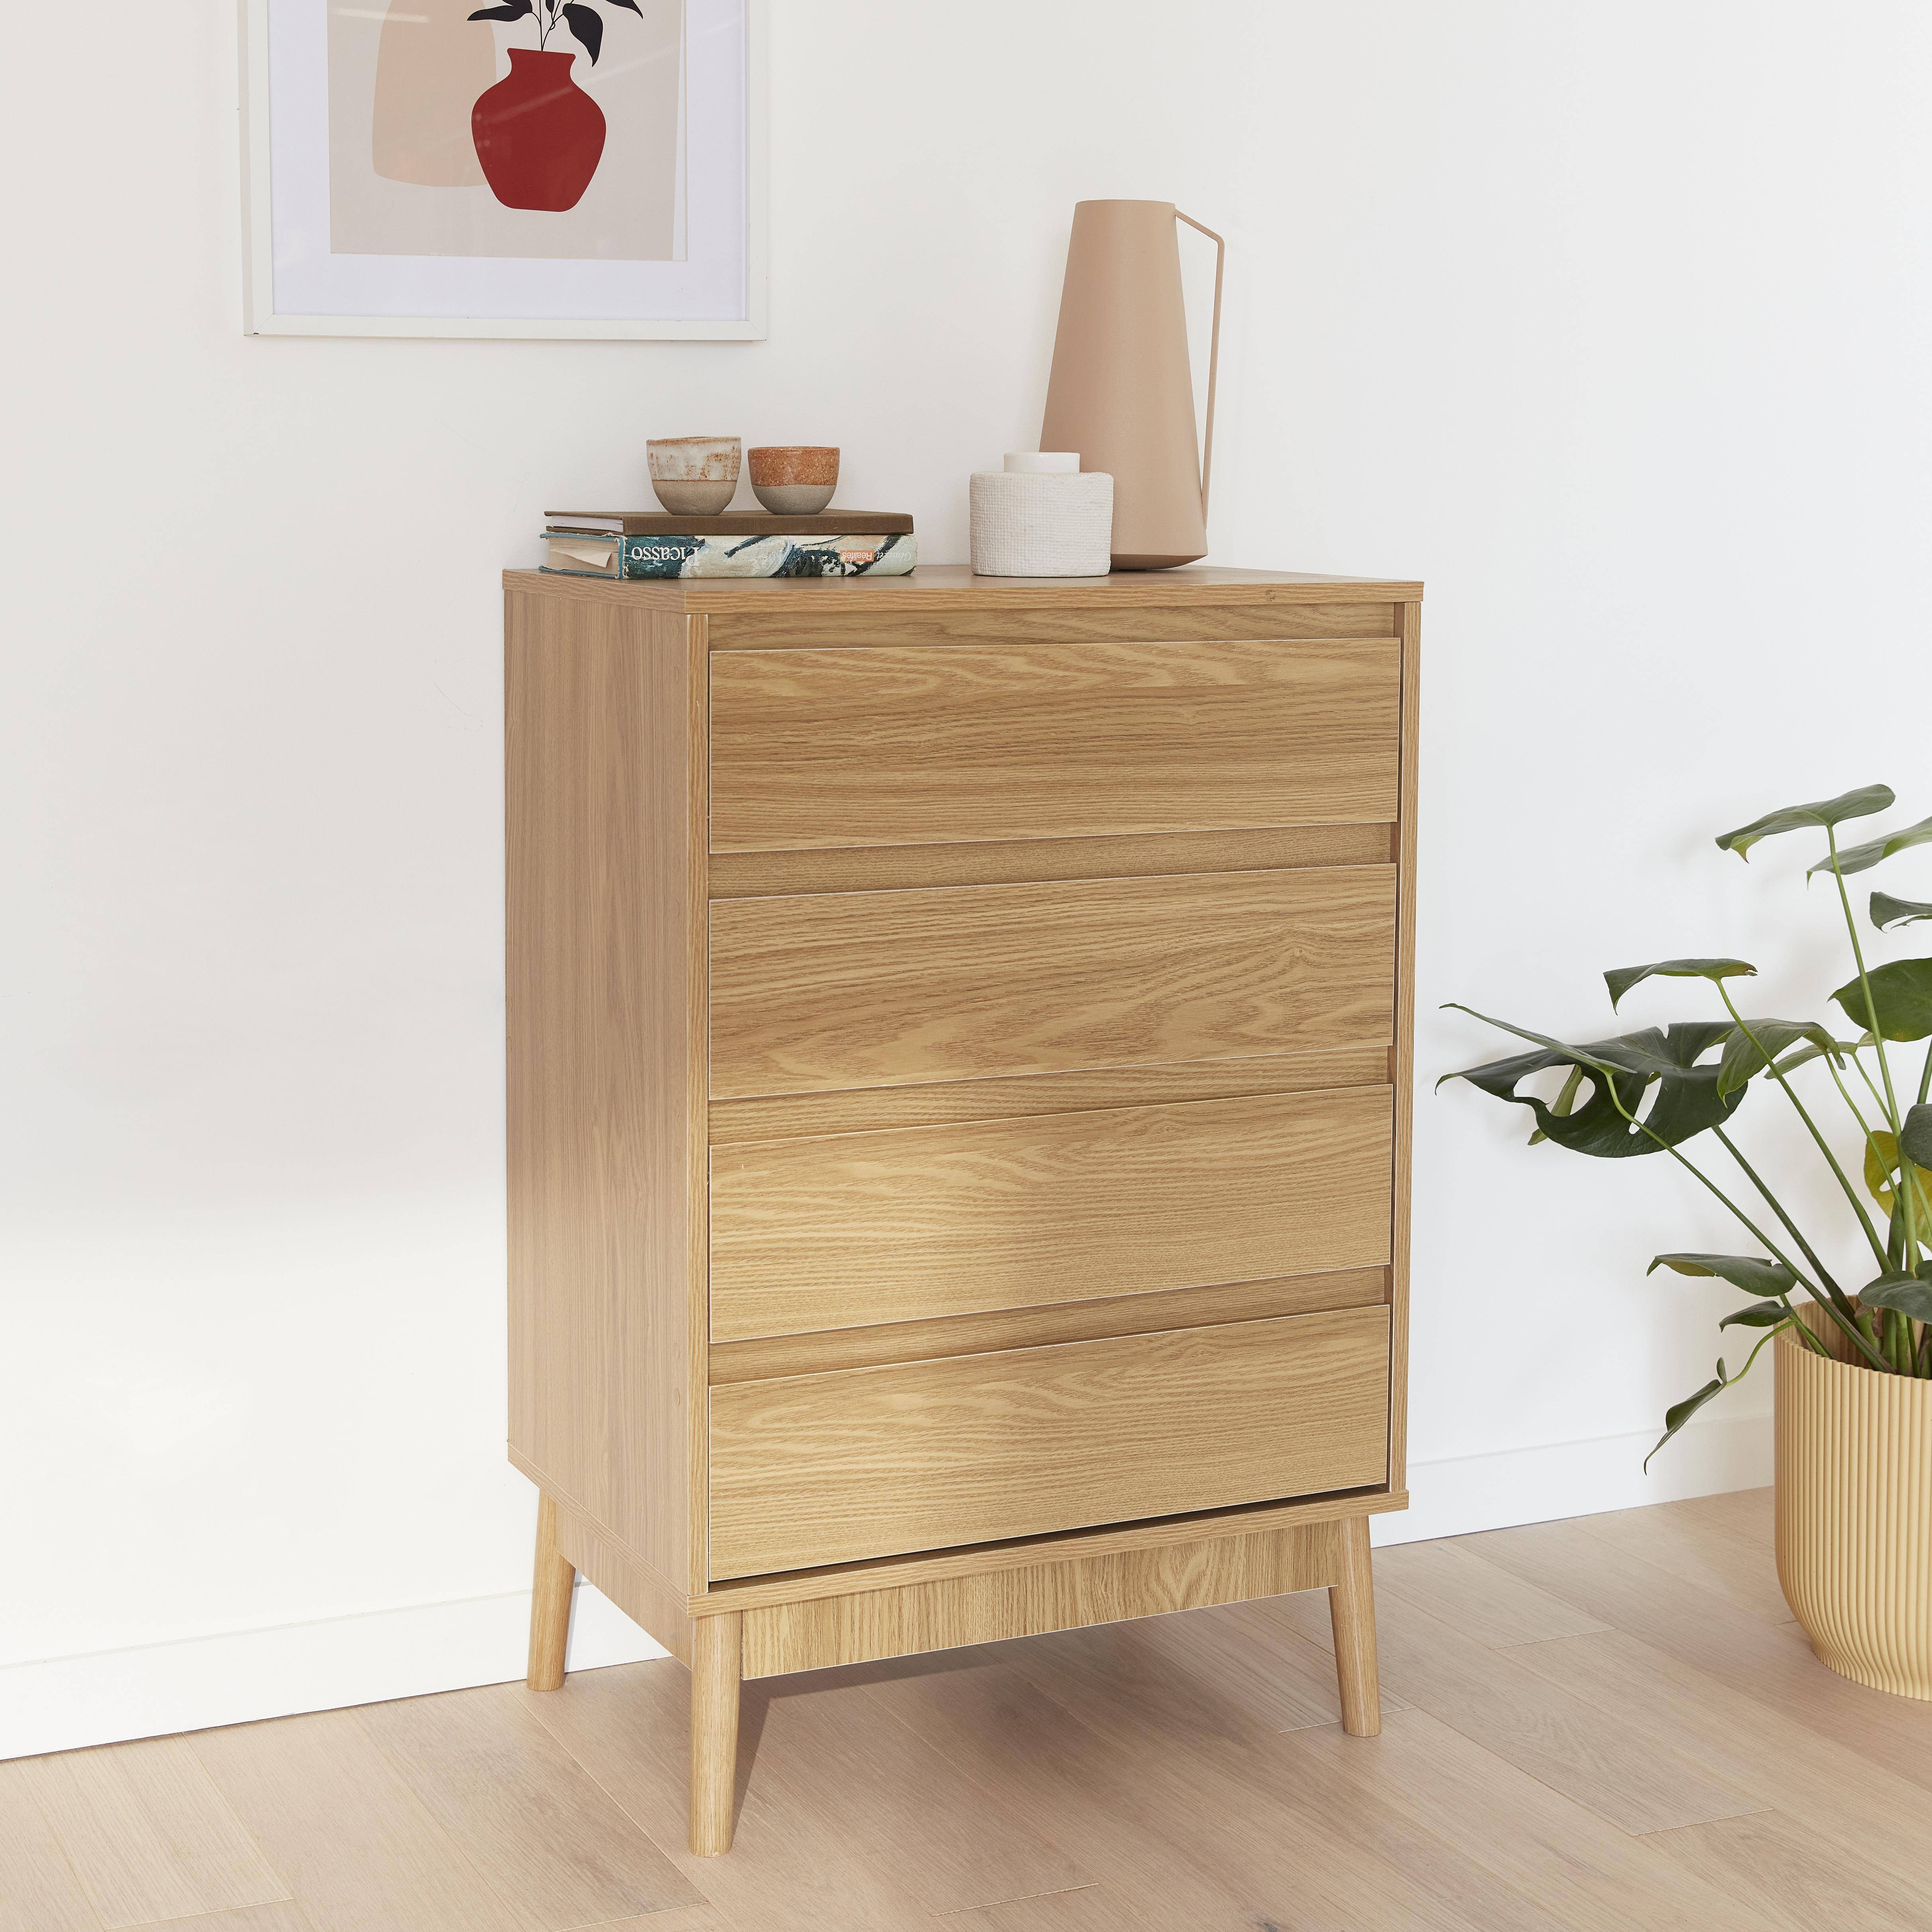 Wooden 4-drawer chest, 60x40x91cm - Dune - Natural wood colour Photo1